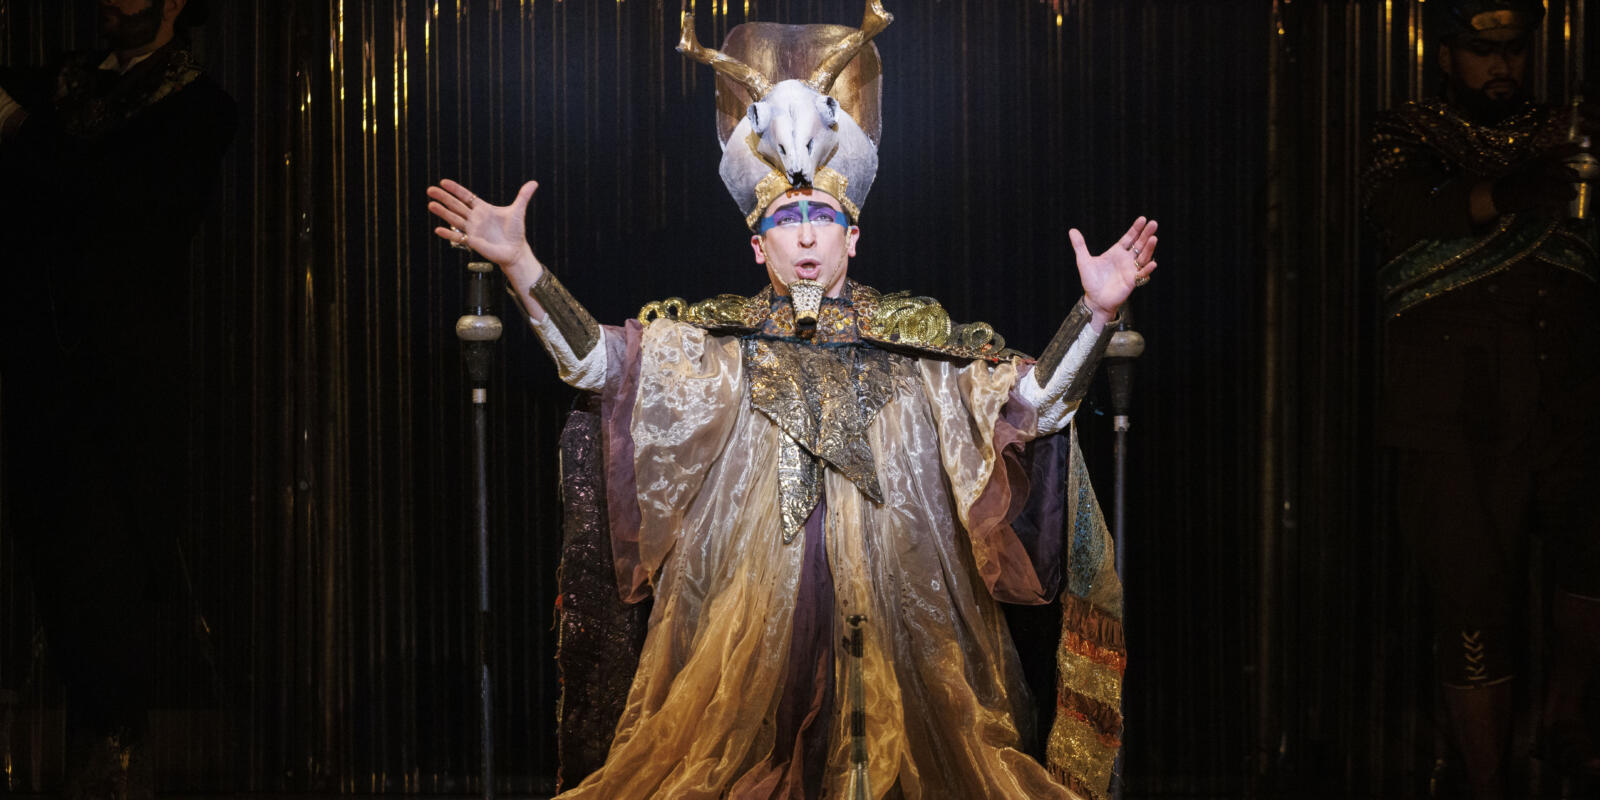 ‘Akhnaten’, opera by Philip Glass produced by Phelim McDermott, returns to the English National Opera (ENO) at the London Coliseum. Pictured: High Priest of Amon played by Paul Curievici Image shot on 9th March 2023. © Belinda Jiao